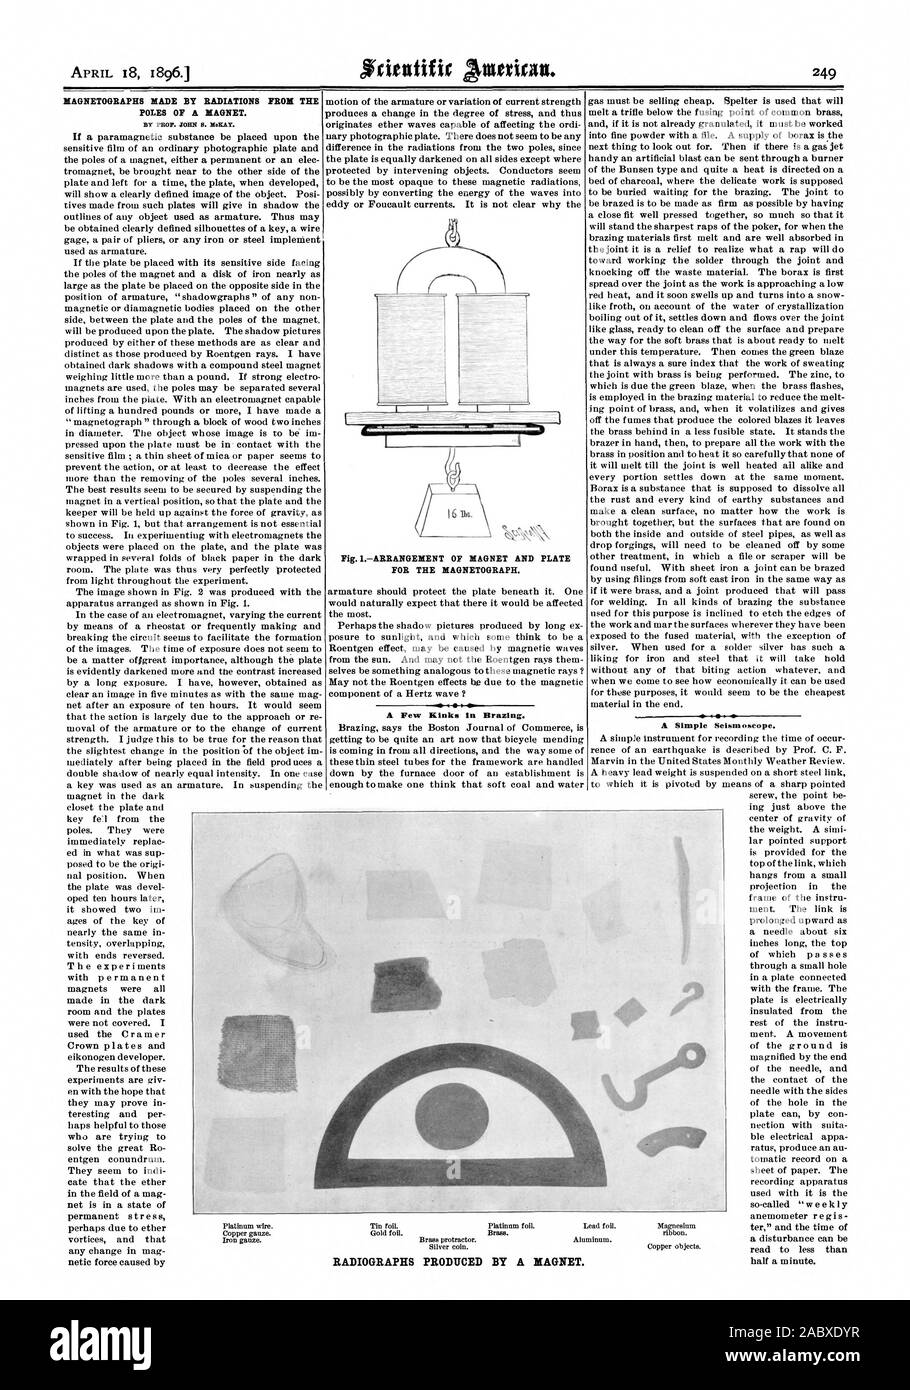 MAGNETOGRAPHS MADE BY RADIATIONS FROM THE POLES OF A MAGNET. BY PROF. JOHN P. NoICAY. Fig. IARRANGEMENT OF MAGNET AND PLATE FOR THE MAGNETOGRAPH. A Few Kinks in Brazing. A Simple Seismoseope. RADIOGRAPHS PRODUCED BY A MAGNET., scientific american, 1896-04-18 Stock Photo